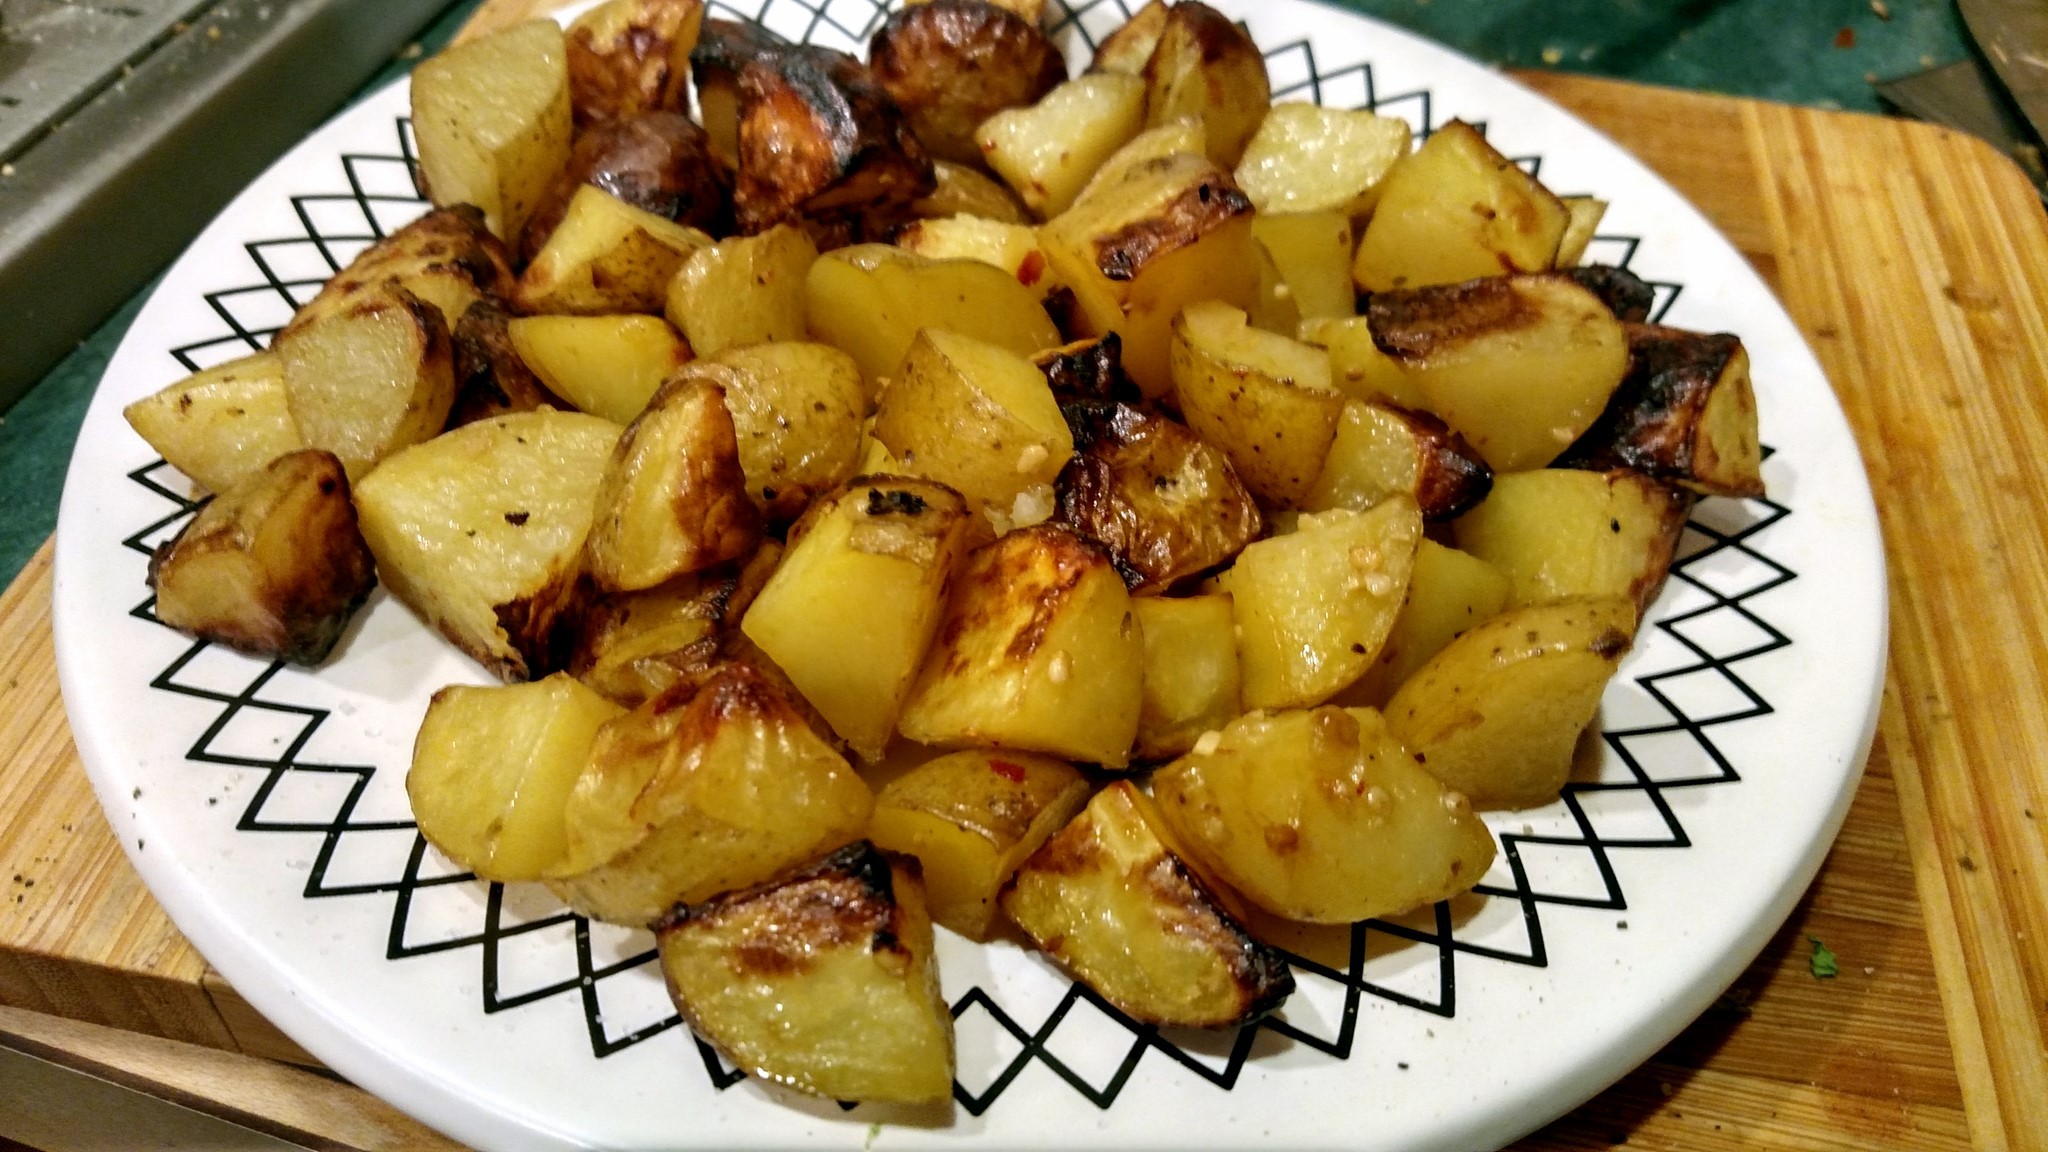 Garlic roasted potatoes in oven recipe on a plate perfect snack for bringe watching TV